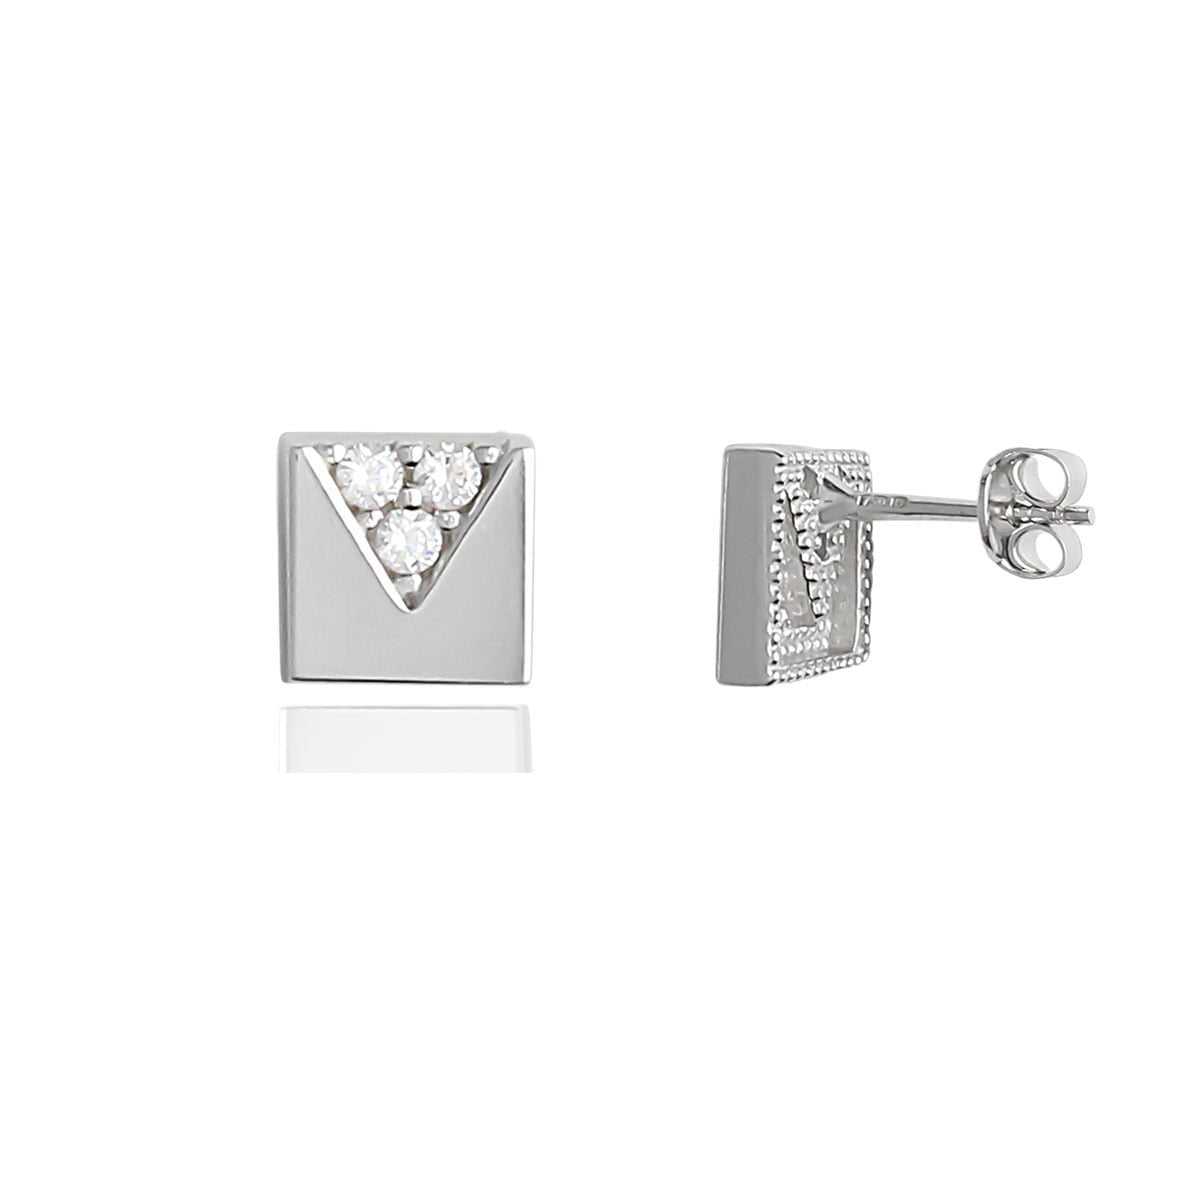 3313 Gia Square Triangle 18ct White Gold Stud Earrings 1